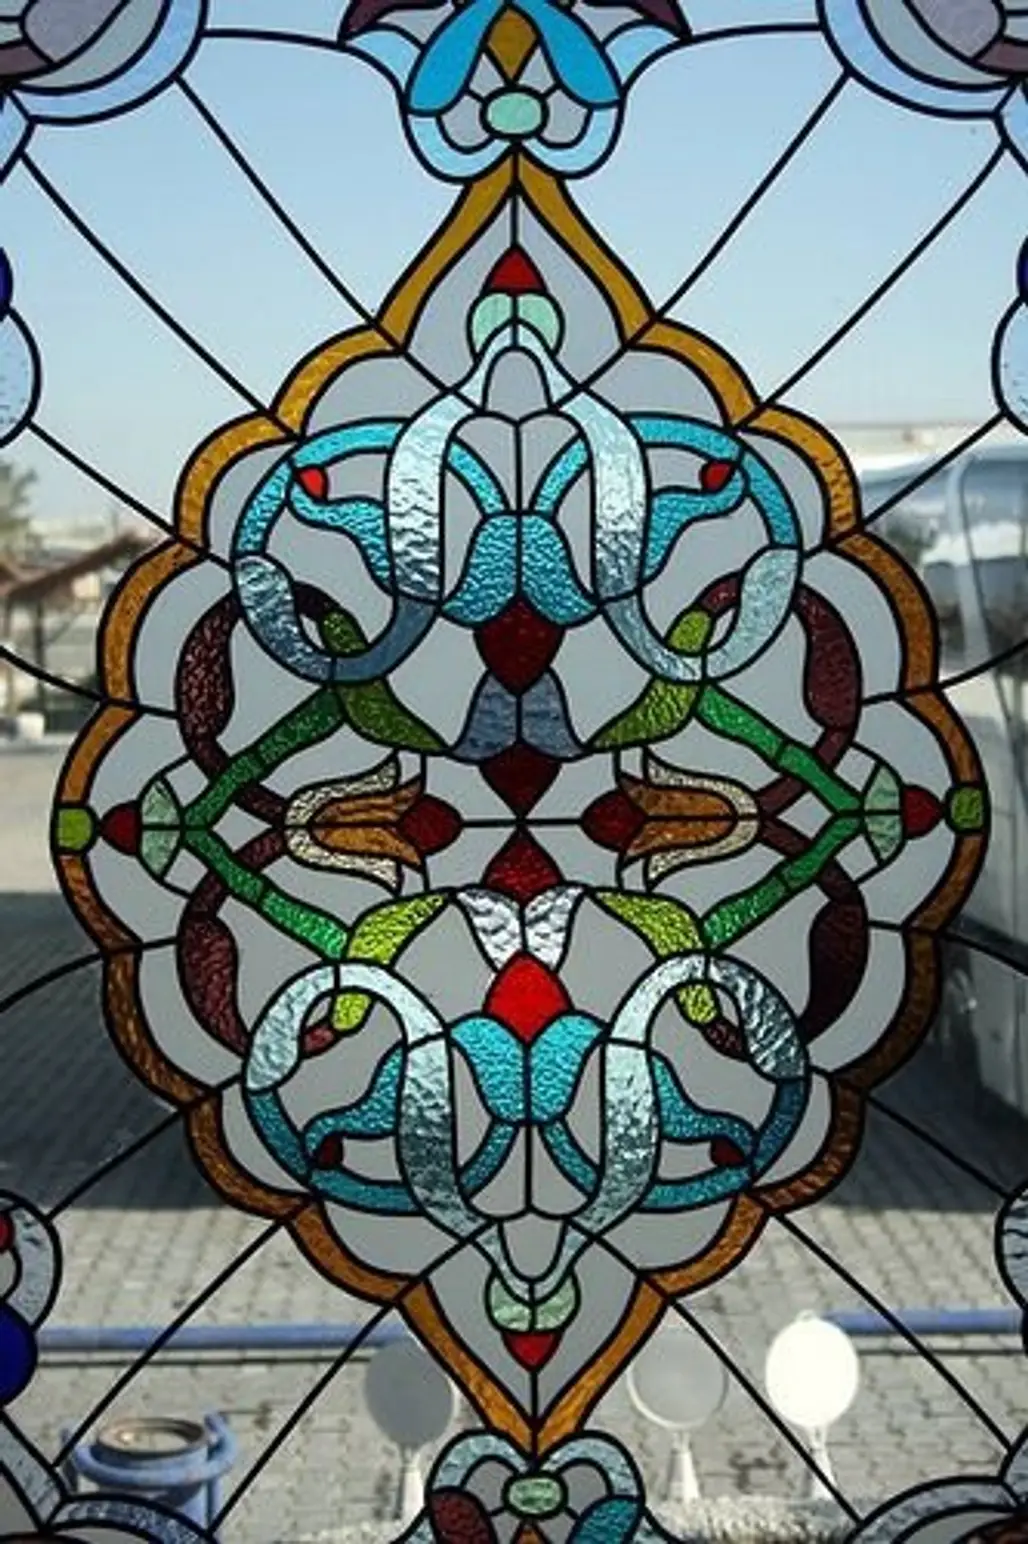 Stained Glass Window in a Turkish Rest Stop